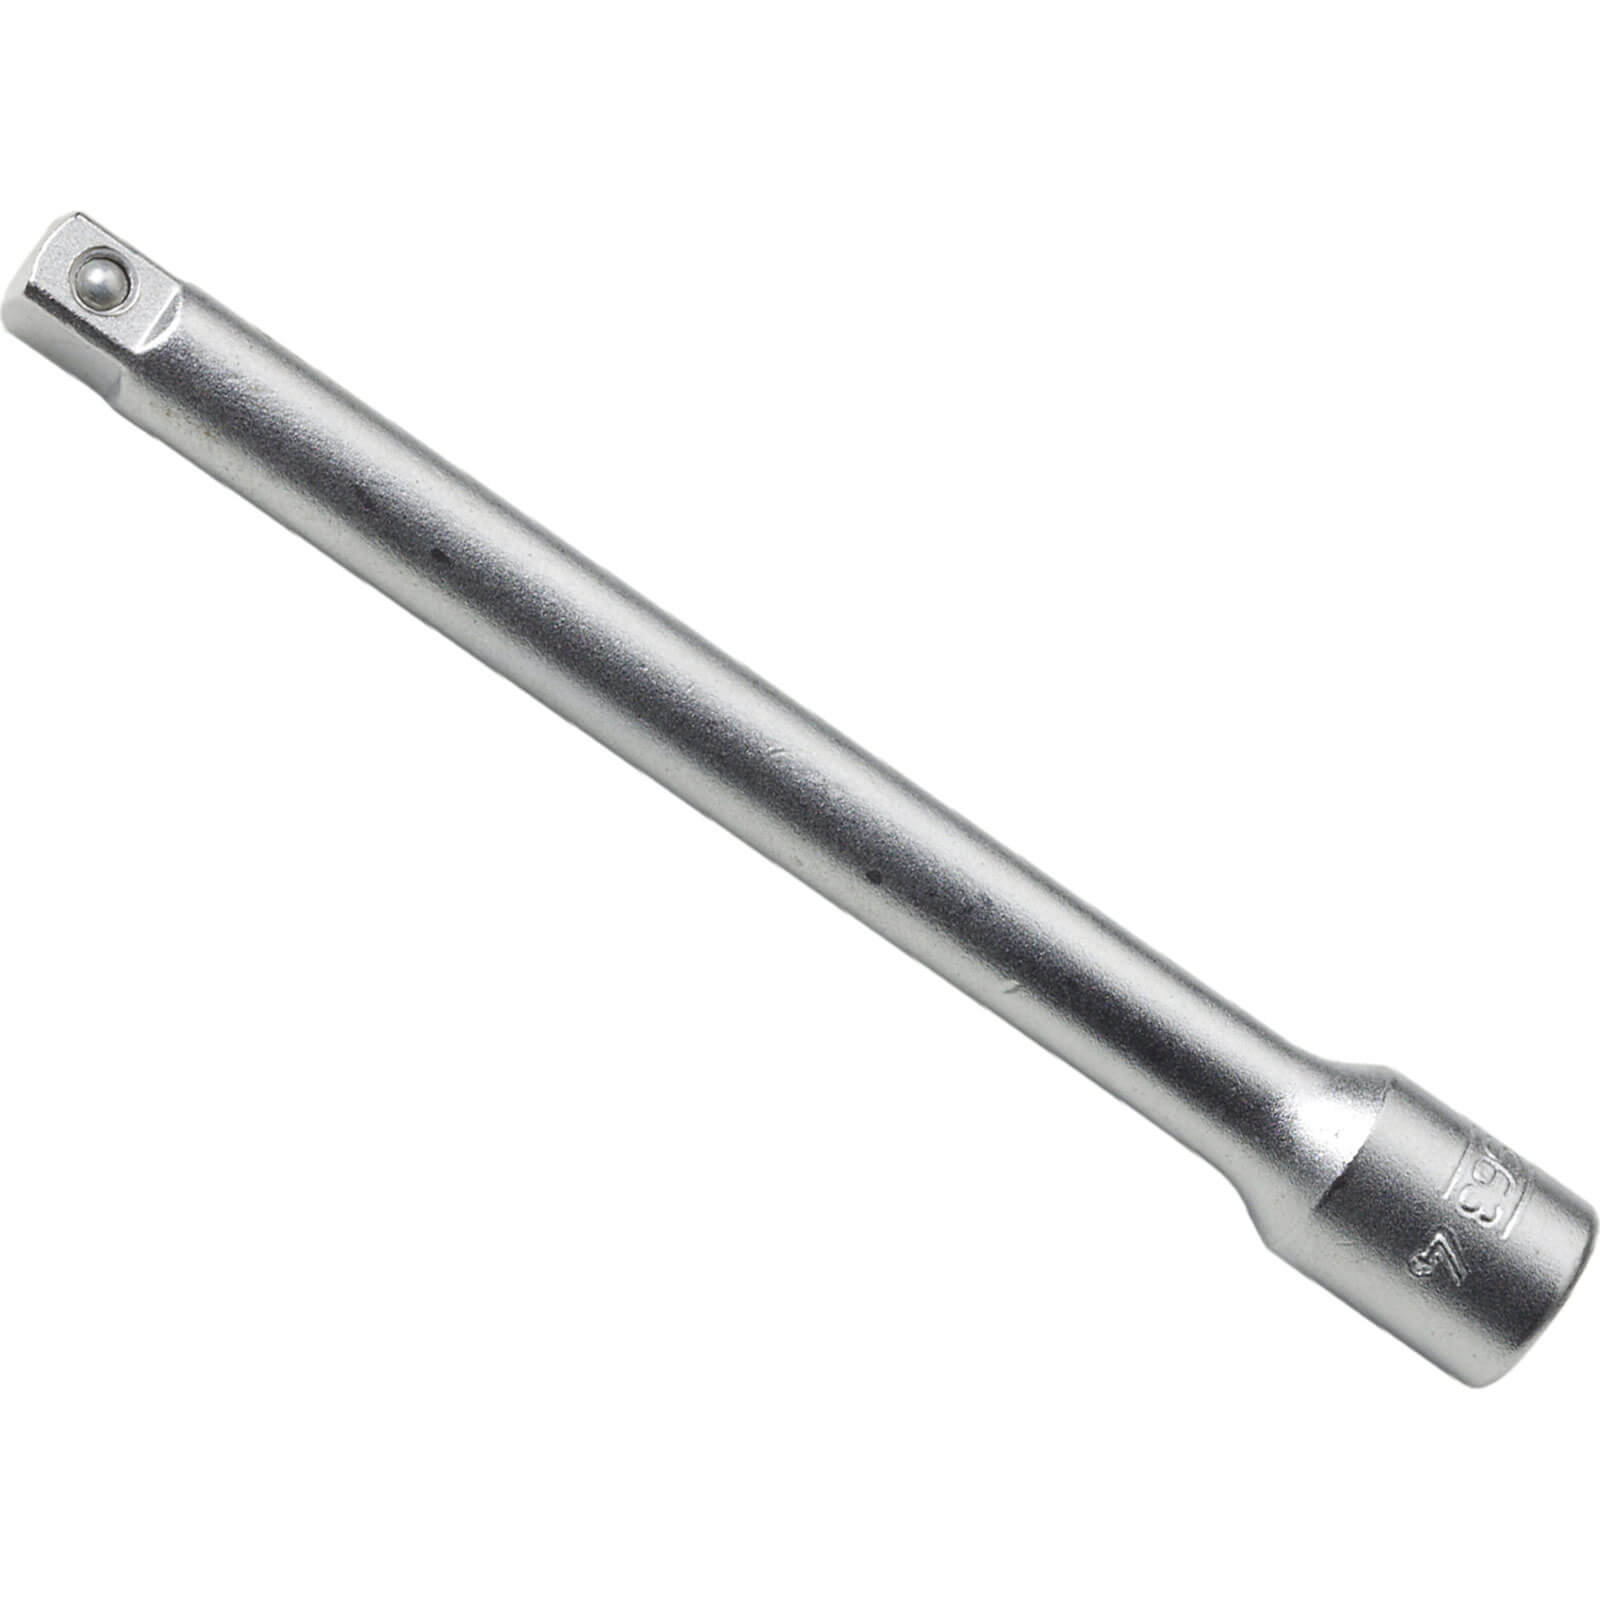 Bahco Extension Bar 4" 1/4" Square Drive Sbs63-4